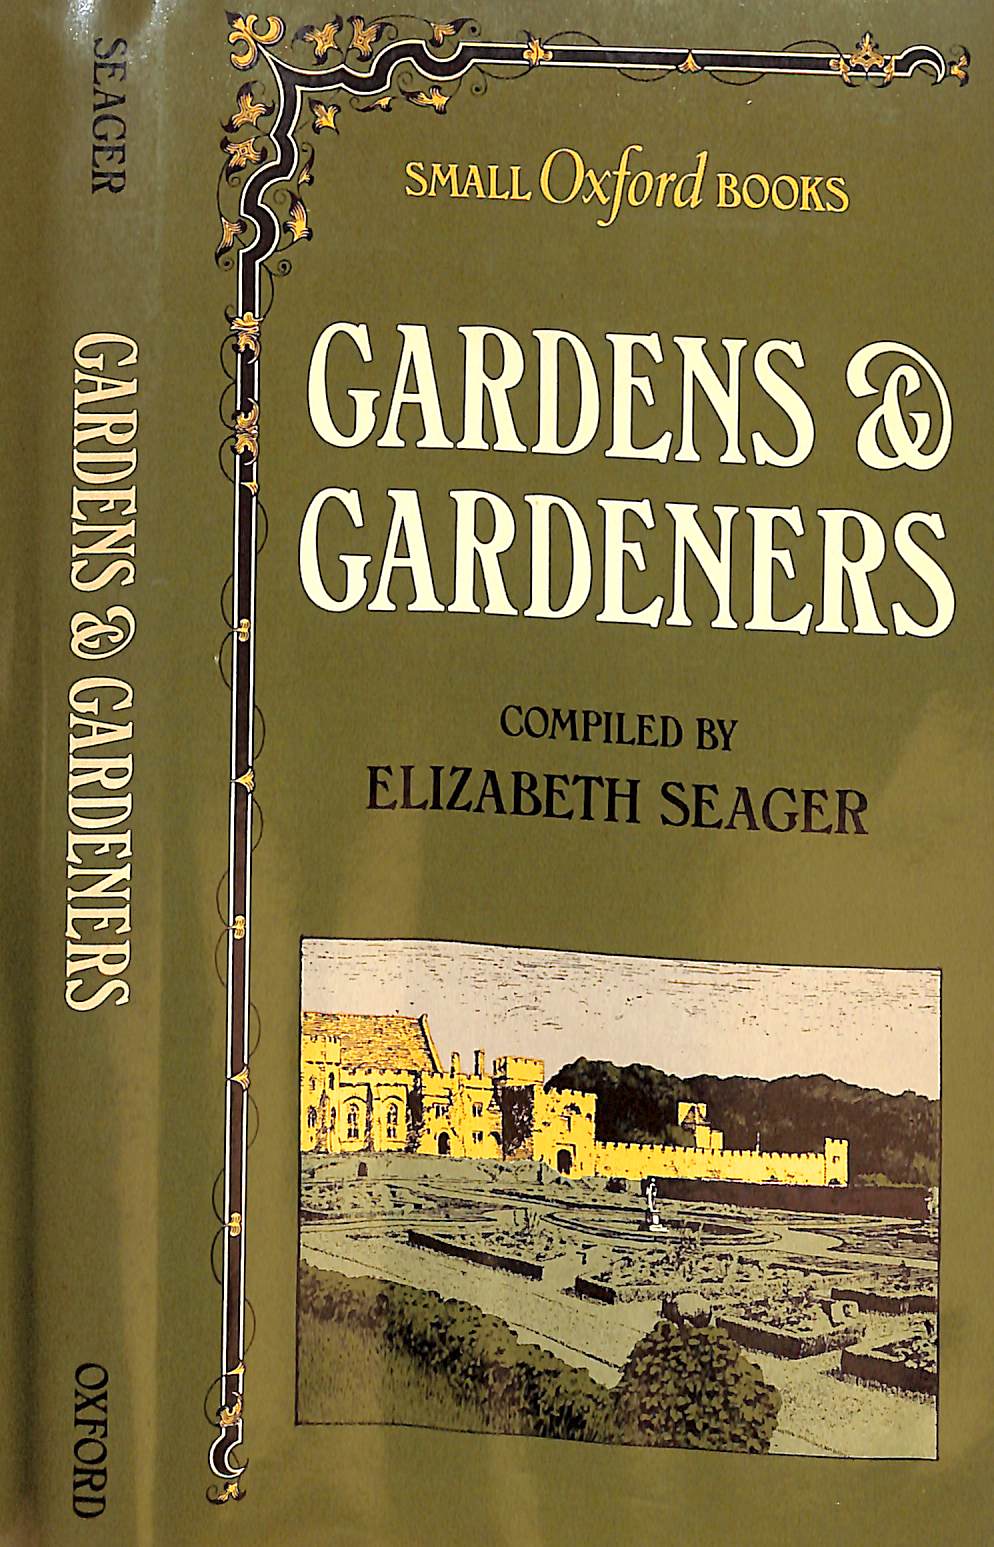 "Gardens & Gardeners" 1984 SEAGER, Elizabeth [compiled by]